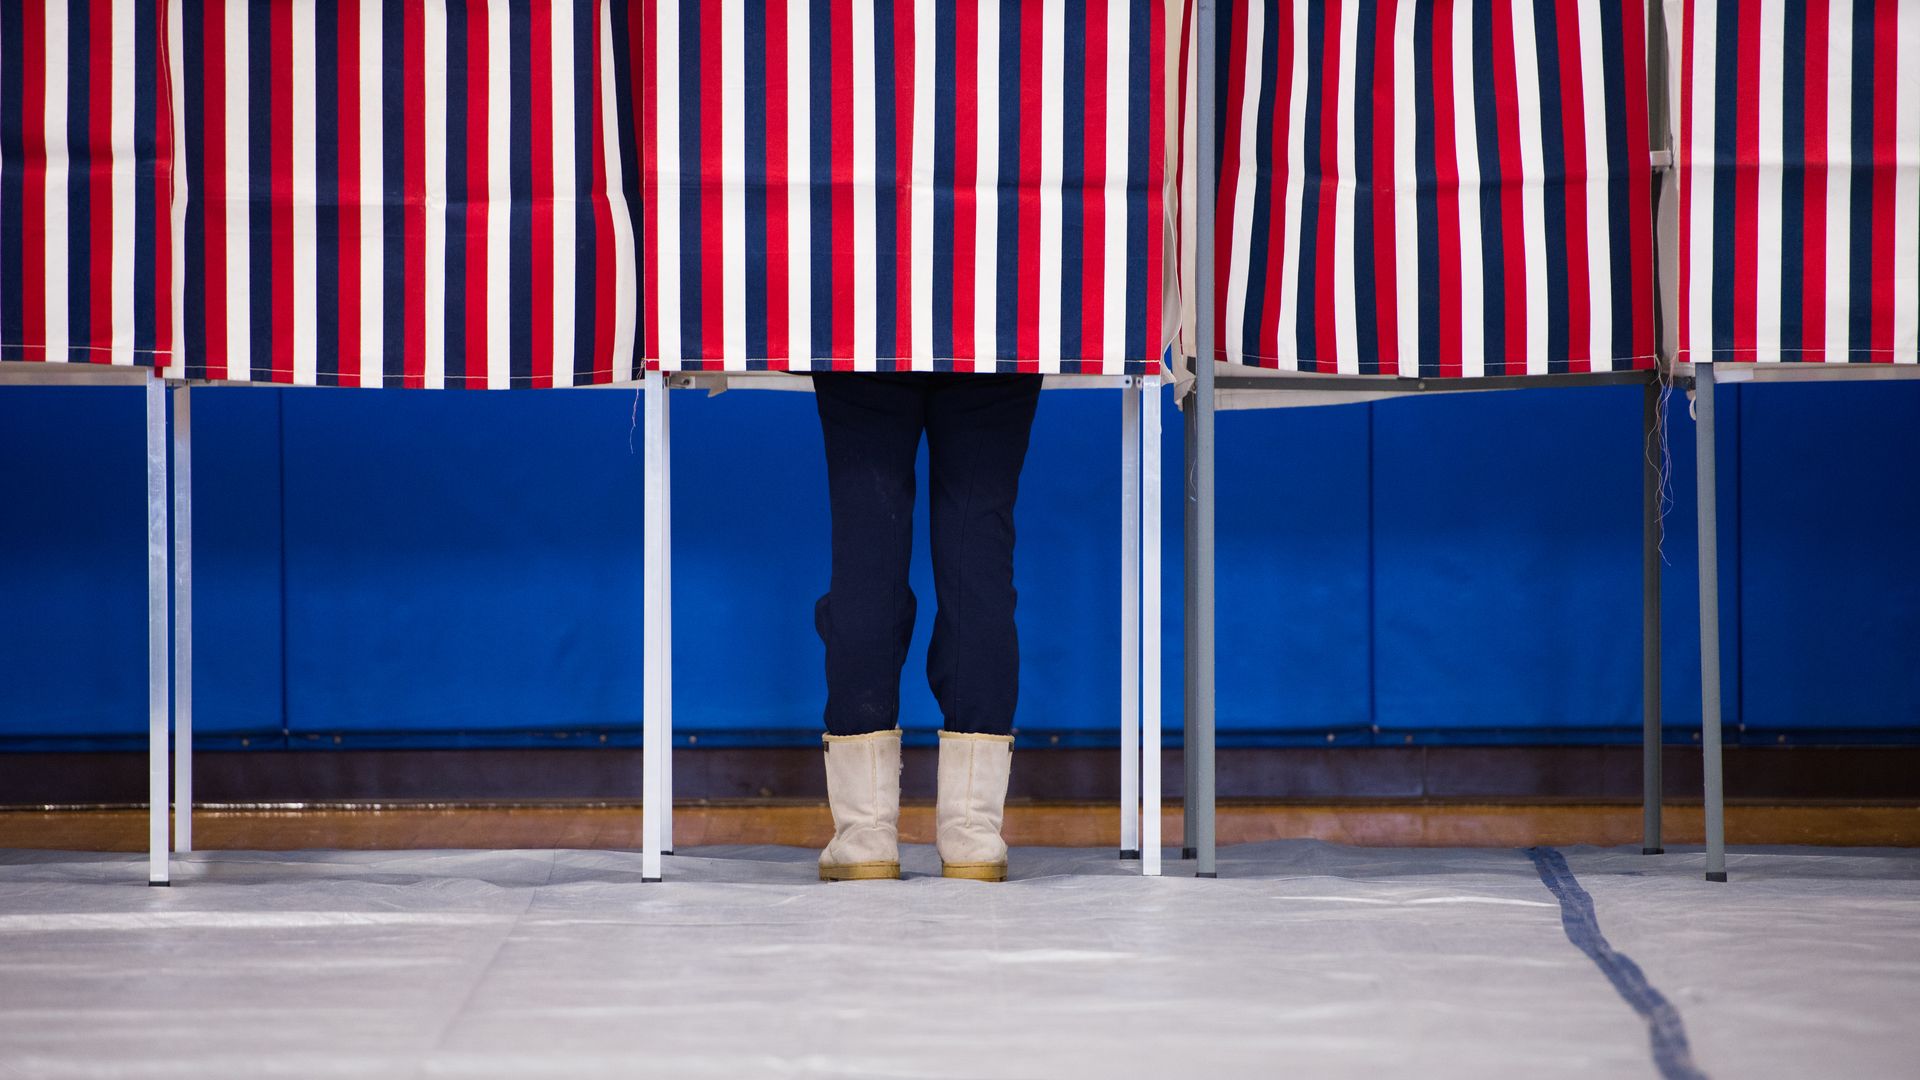 Pair of feet in blue pants underneath polling booth with red, white, blue stripes.